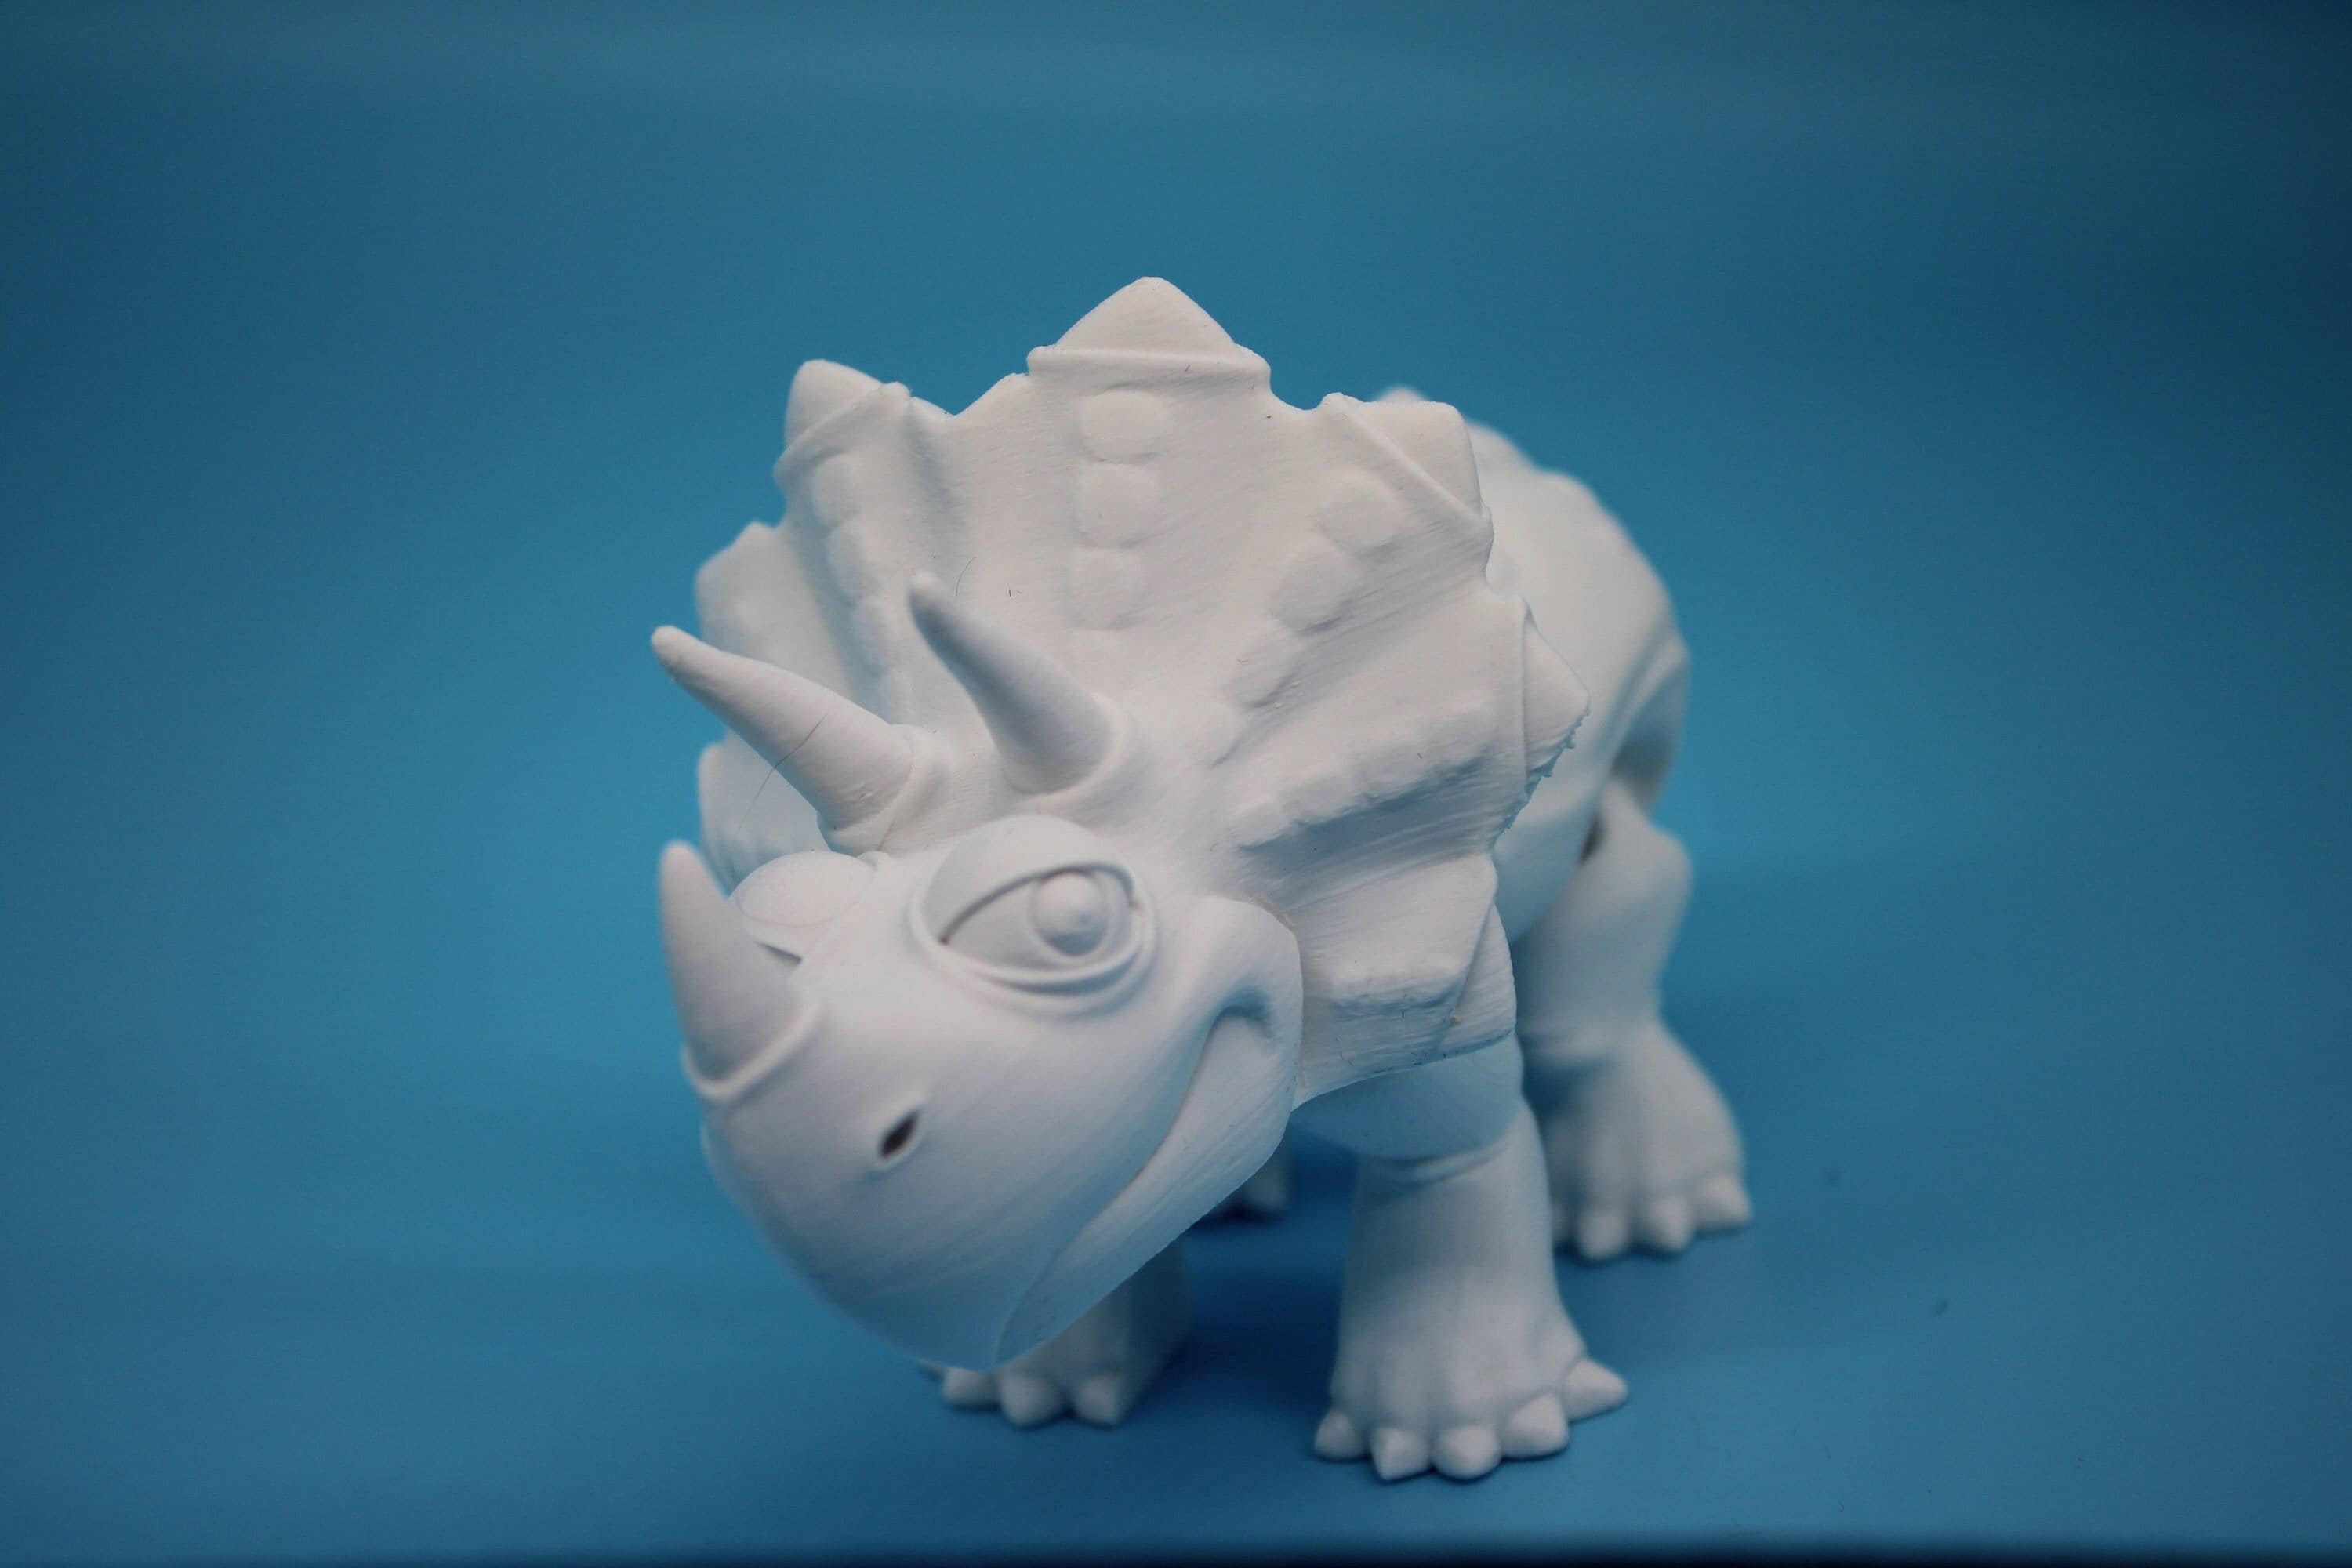 Cute Flexi White Triceratops. Unique 3D printed Triceratops. Great Articulating fidget toy, desk, sensory toy. 6.5 inch